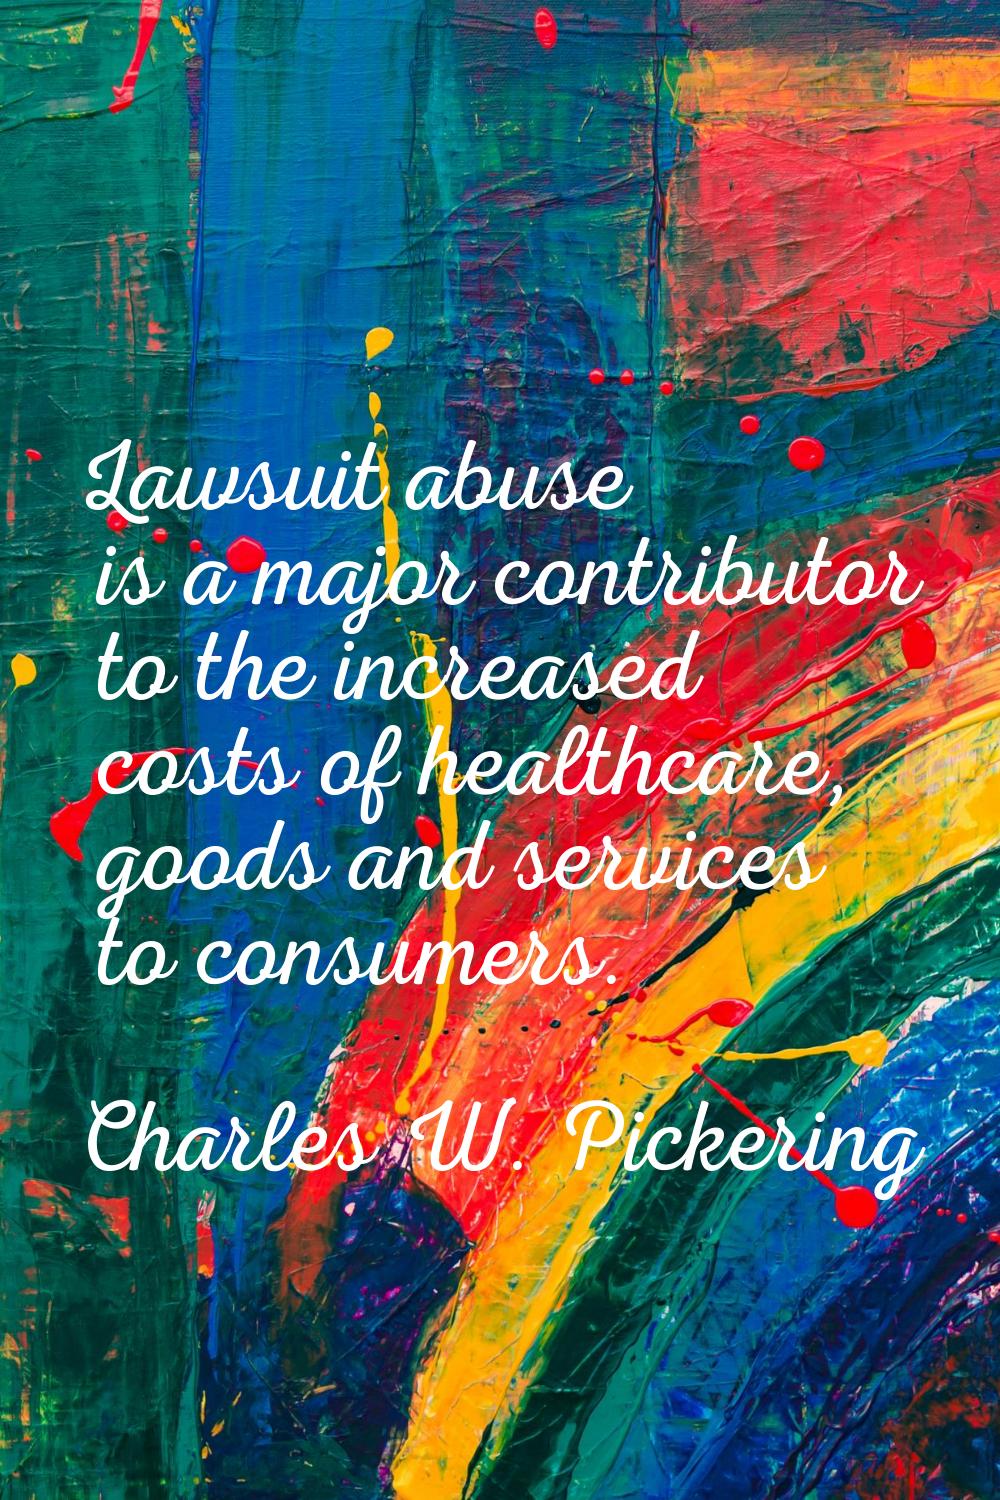 Lawsuit abuse is a major contributor to the increased costs of healthcare, goods and services to co